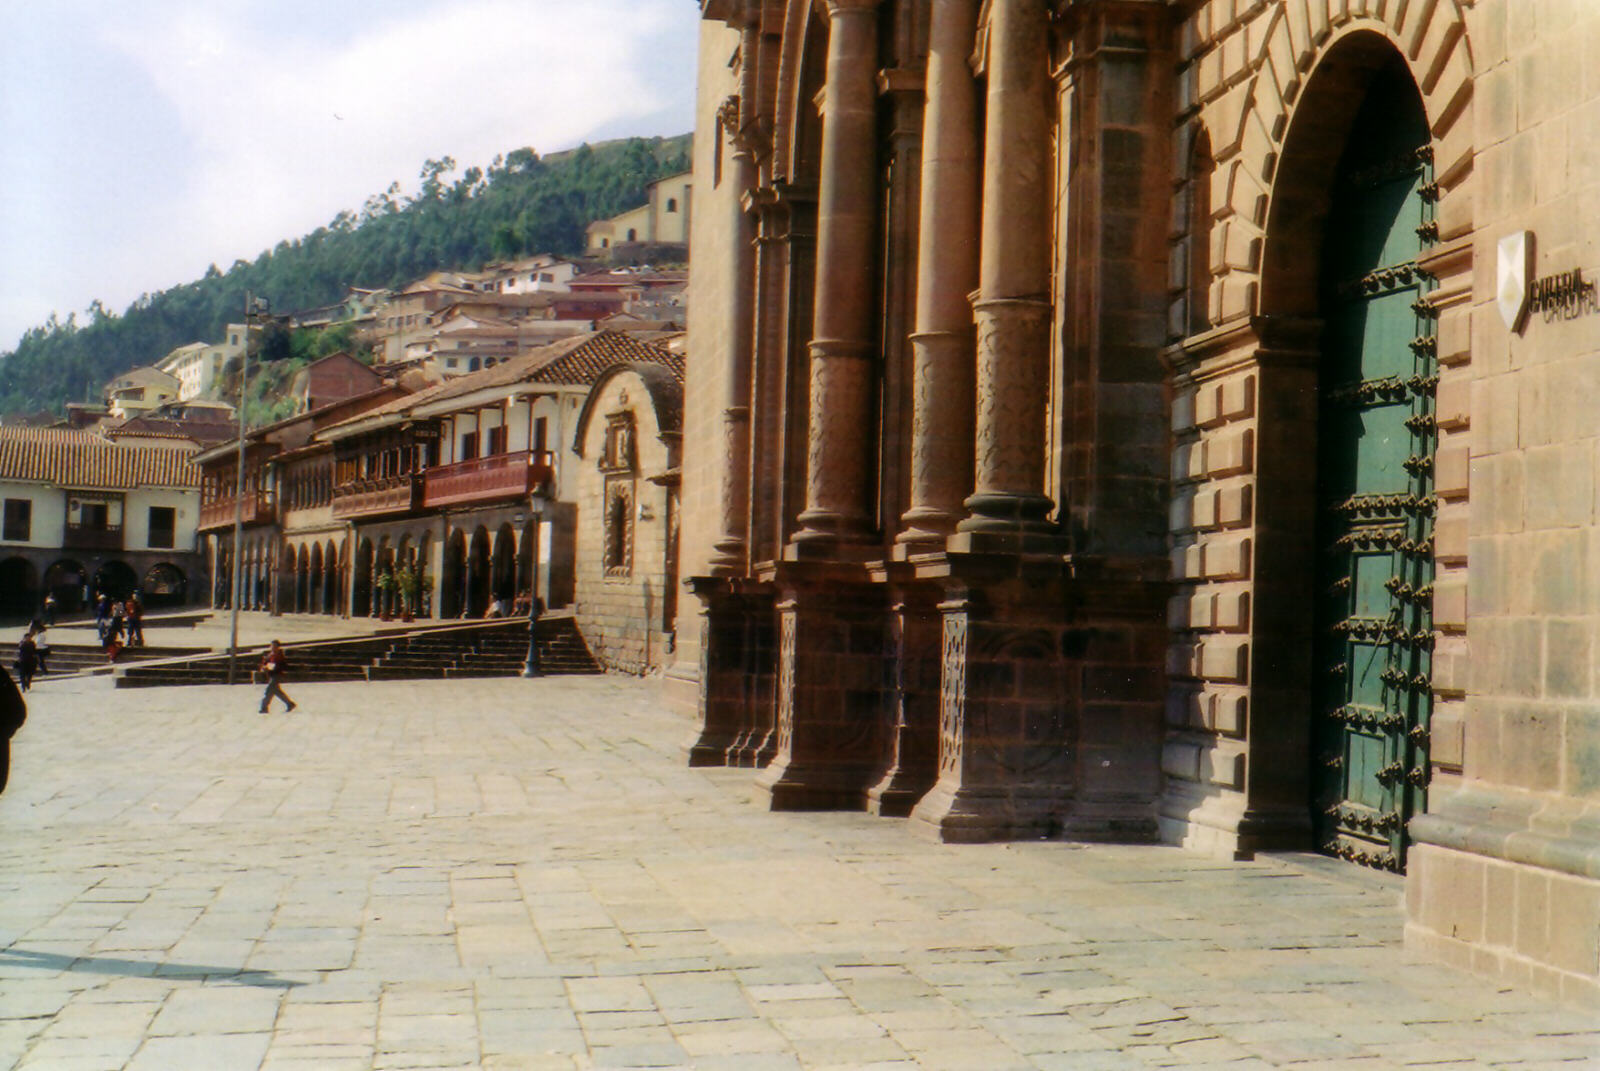 The entrance to Cusco cathedral on the main square